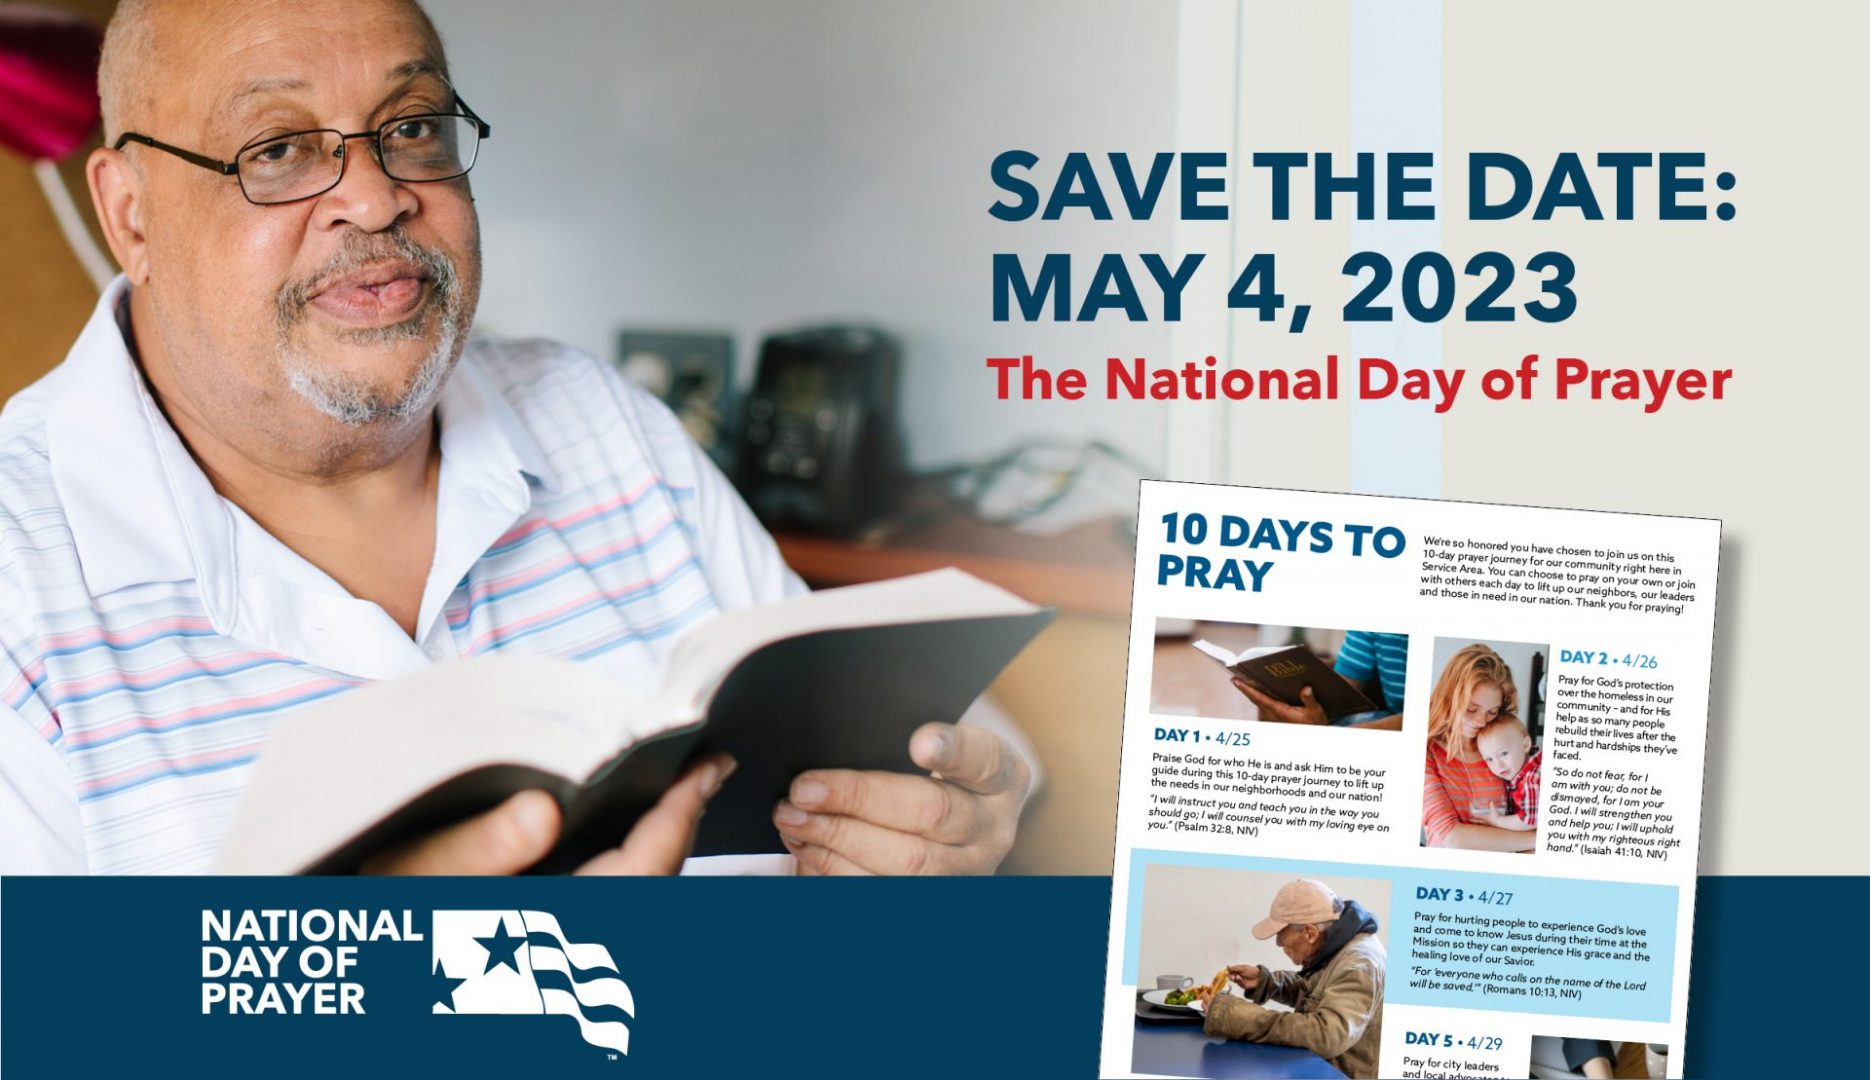 Save the Date for the National Day of Prayer